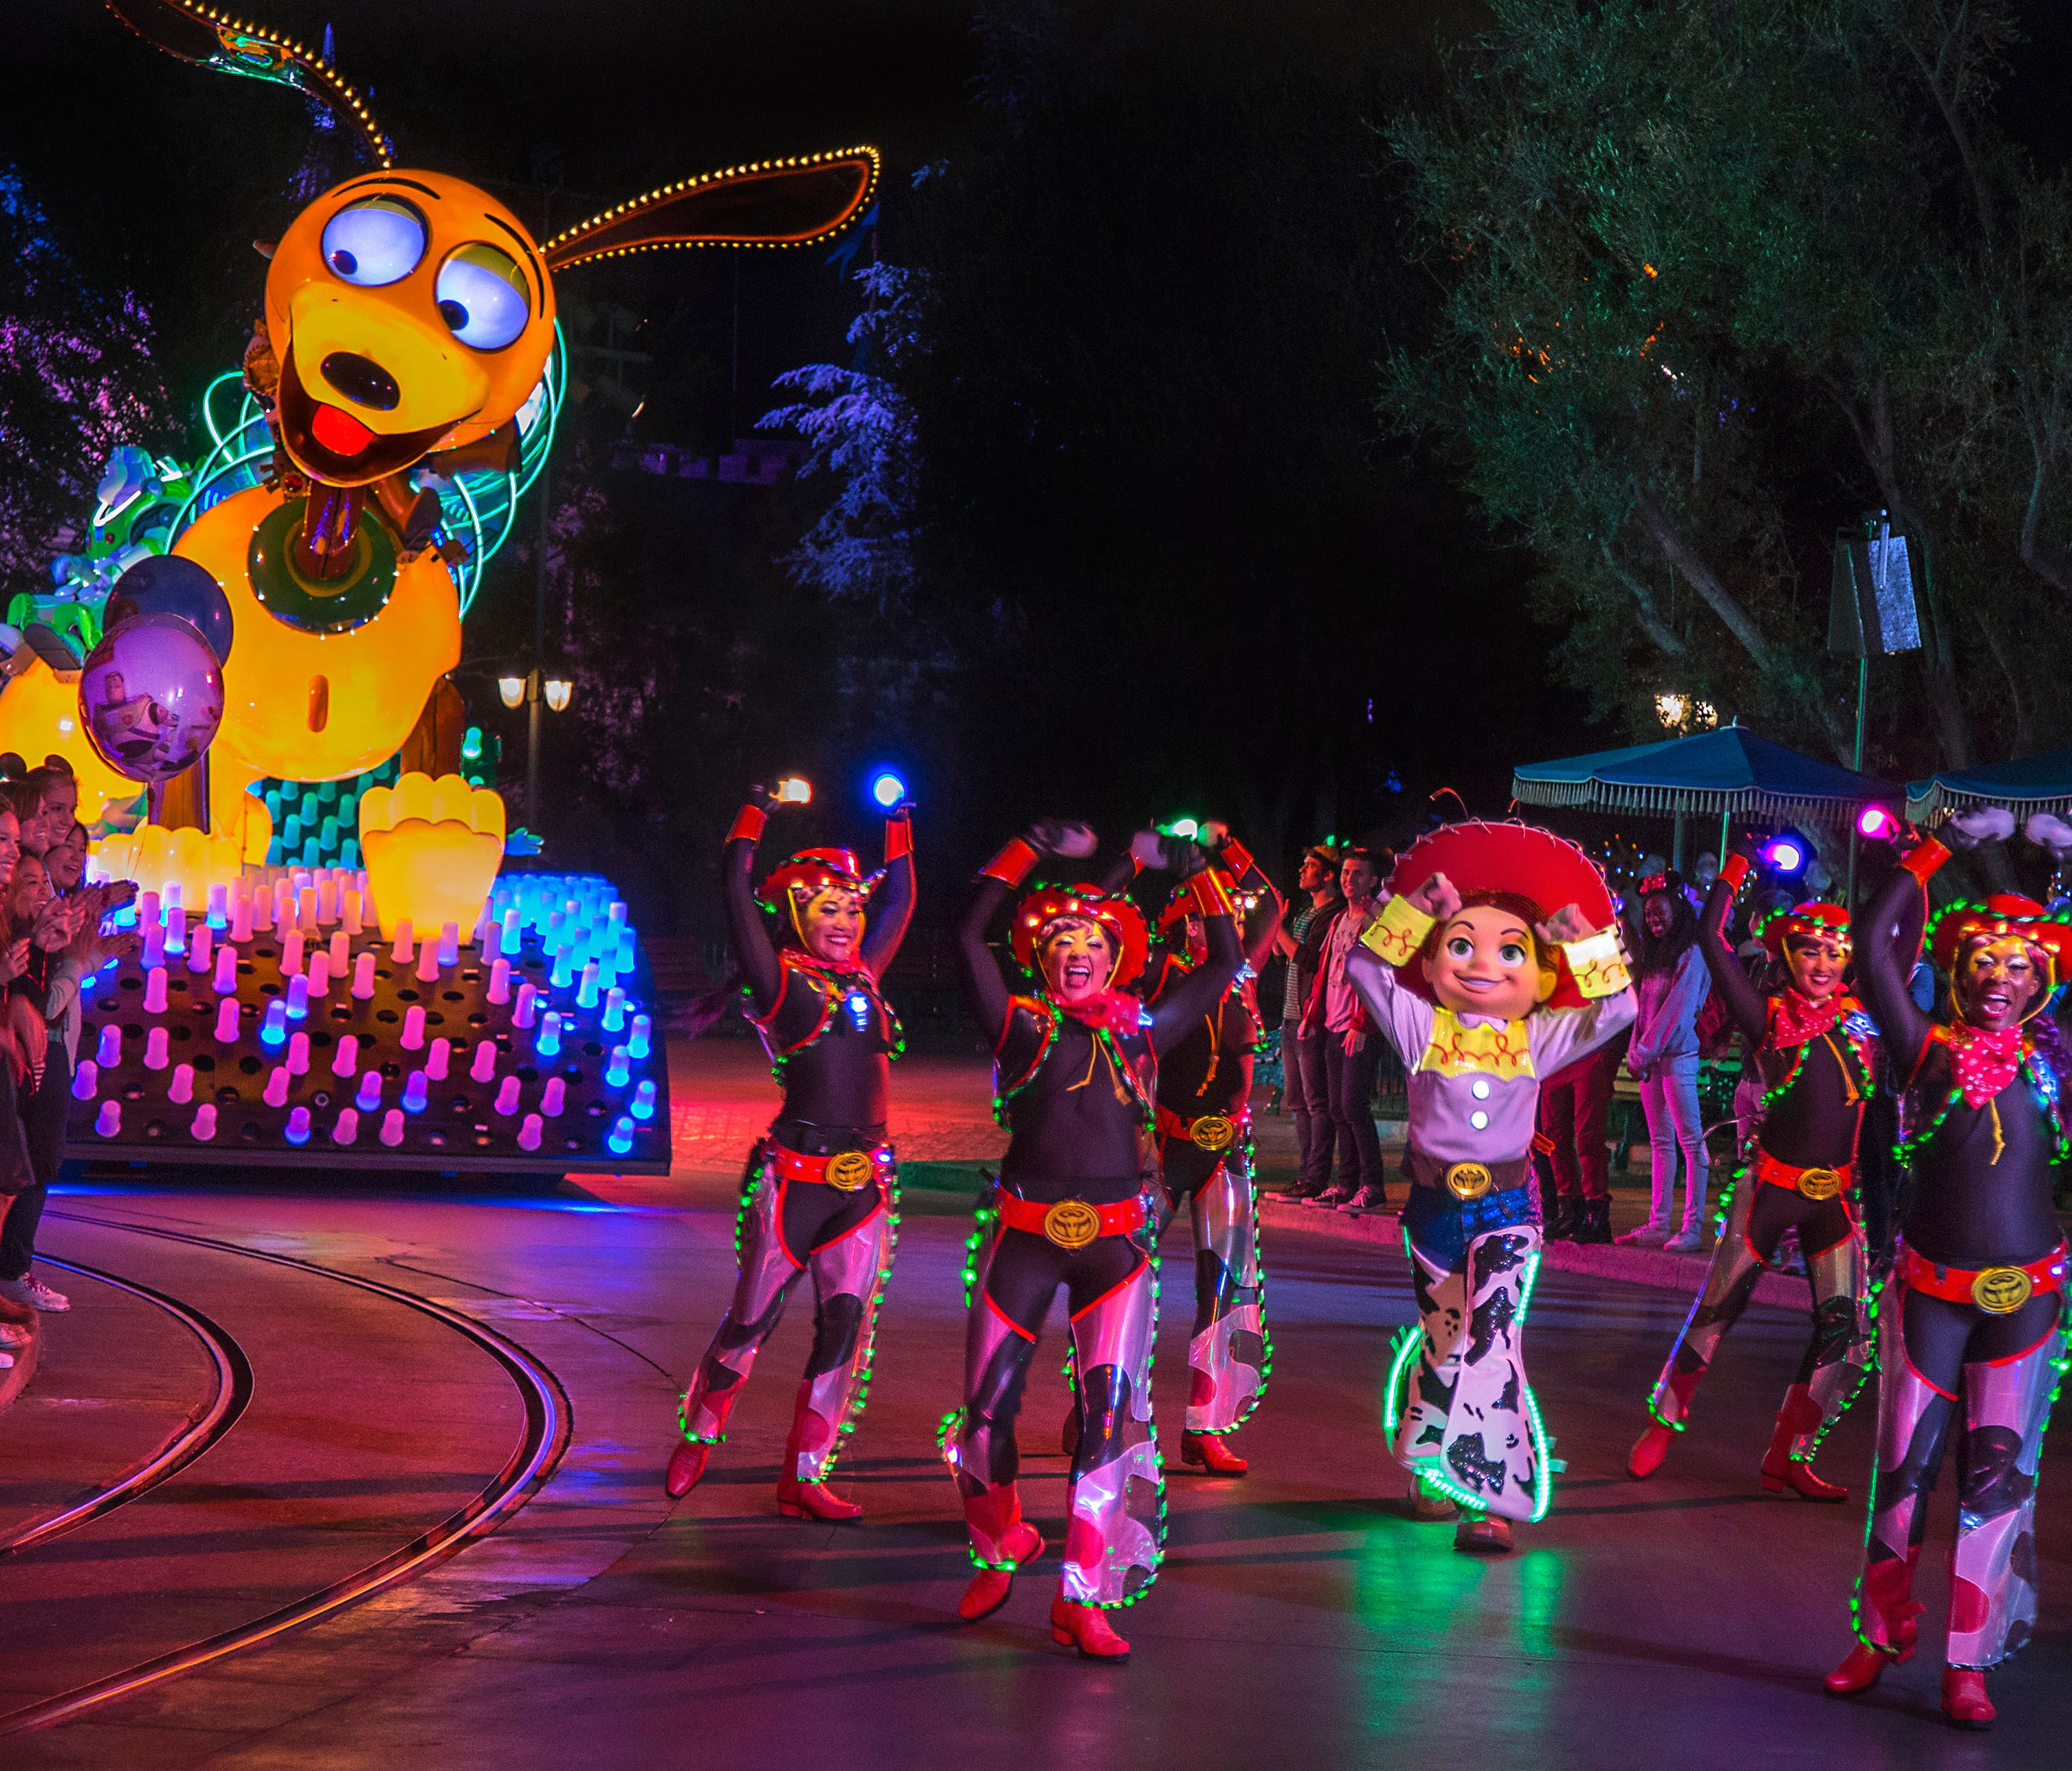 'PAINT THE NIGHT'  PARADE (ANAHEIM, Calif.)— Jessie from the Disney•Pixar 'Toy Story' films appears with parade performers in synchronized, LED costumes in this after-dark spectacular inspired by the iconic 'Main Street Electrical Parade.' 'Paint the